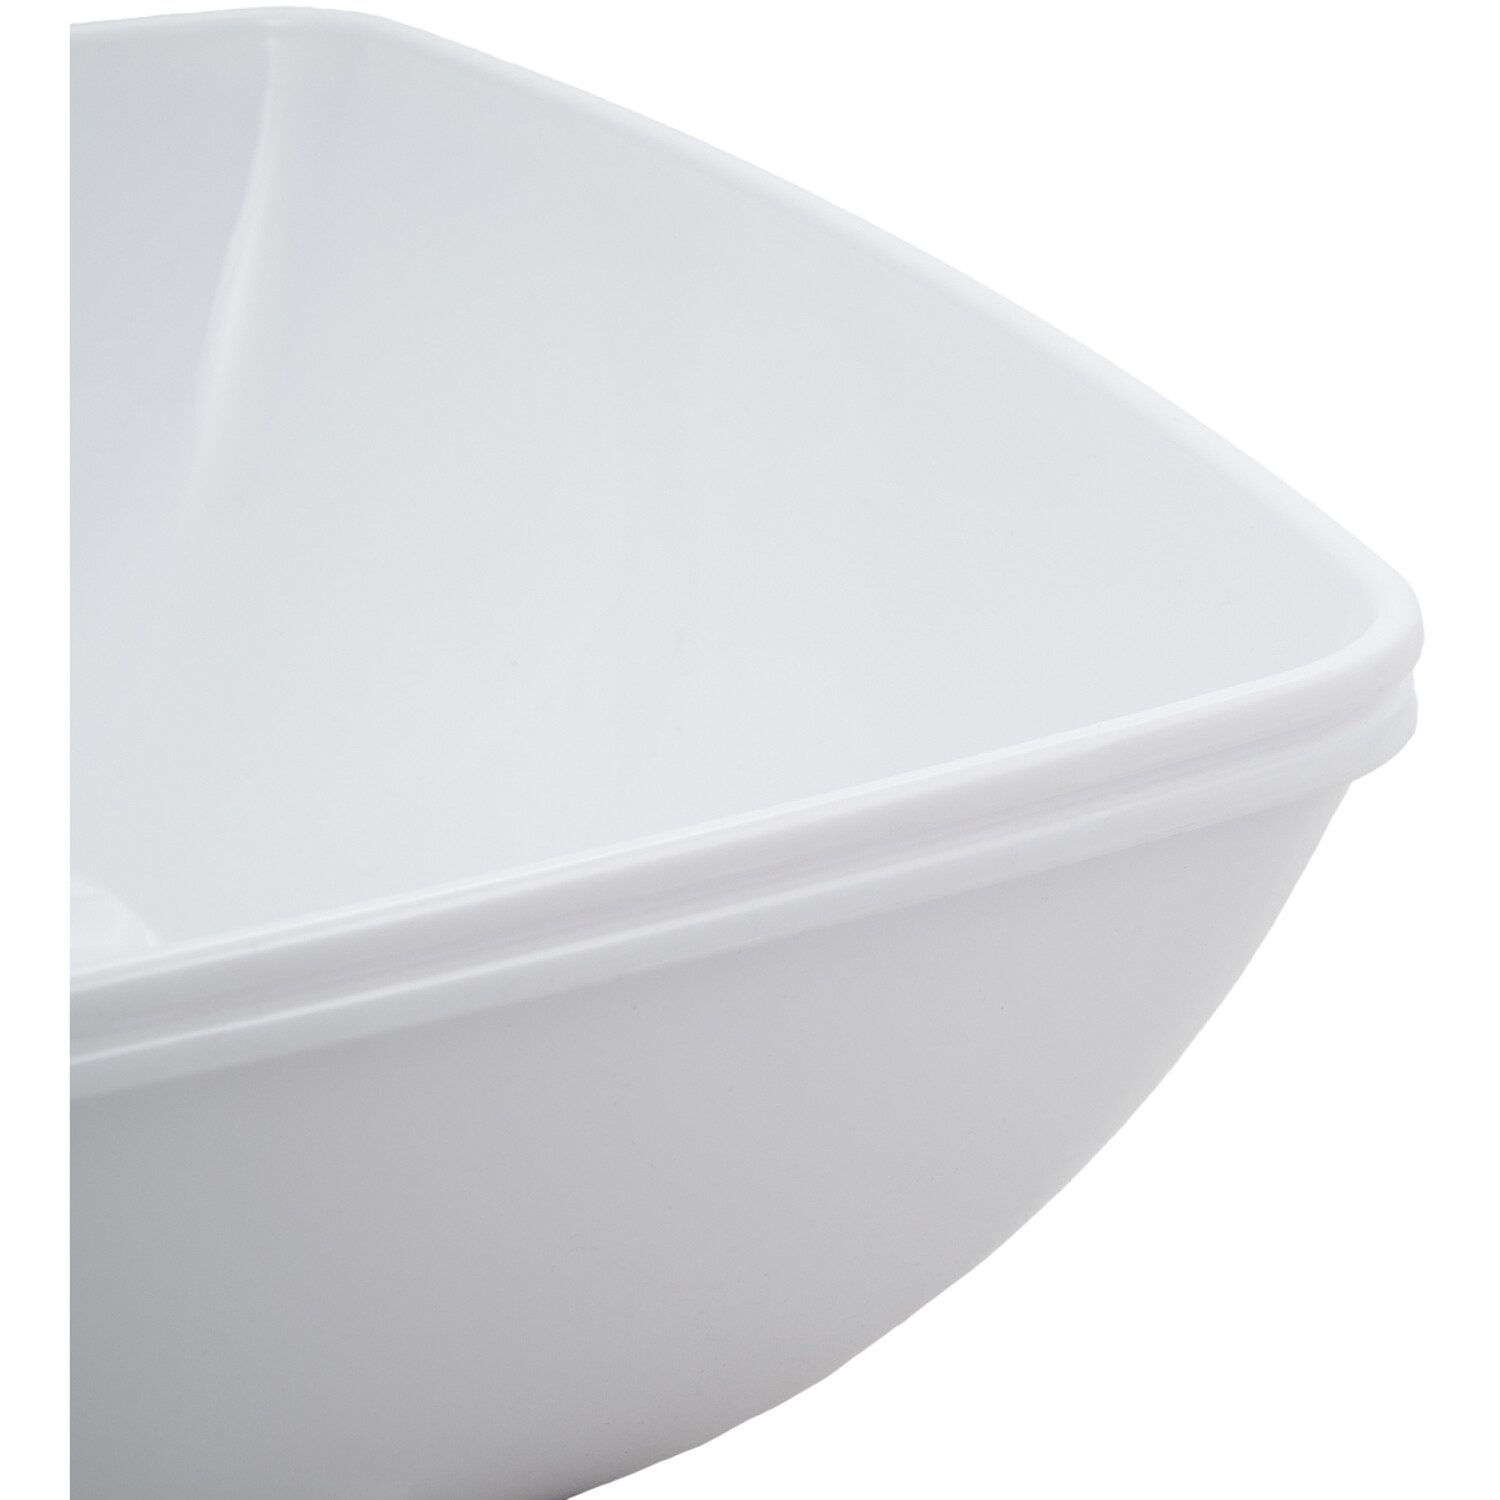 Pack of 2 My Home Square Bowls - White Image 6